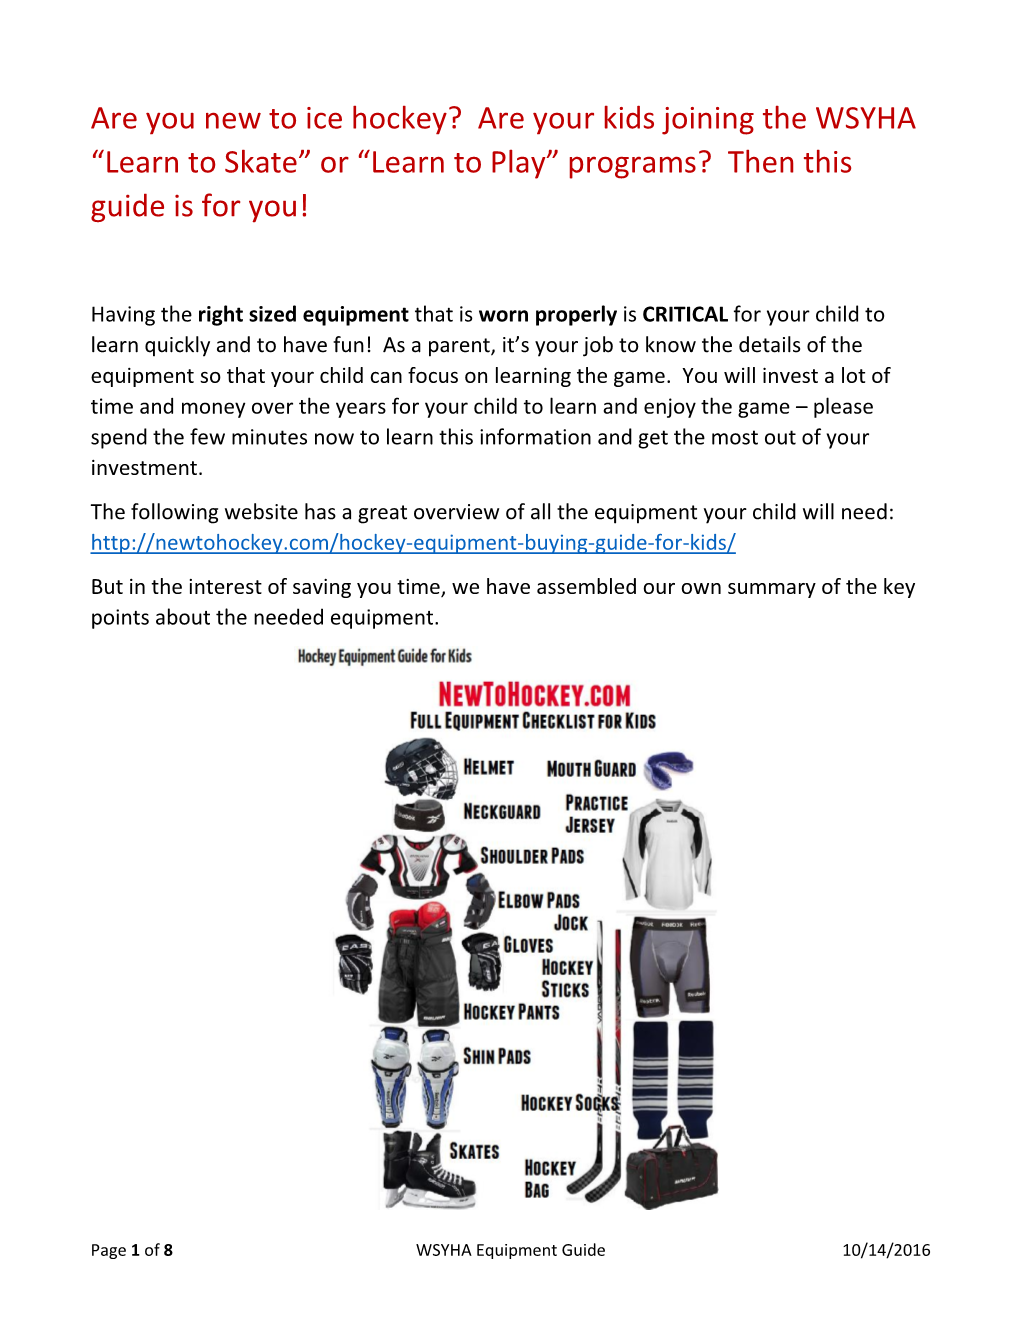 Are You New to Ice Hockey? Are Your Kids Joining the WSYHA “Learn to Skate” Or “Learn to Play” Programs? Then This Guide Is for You!